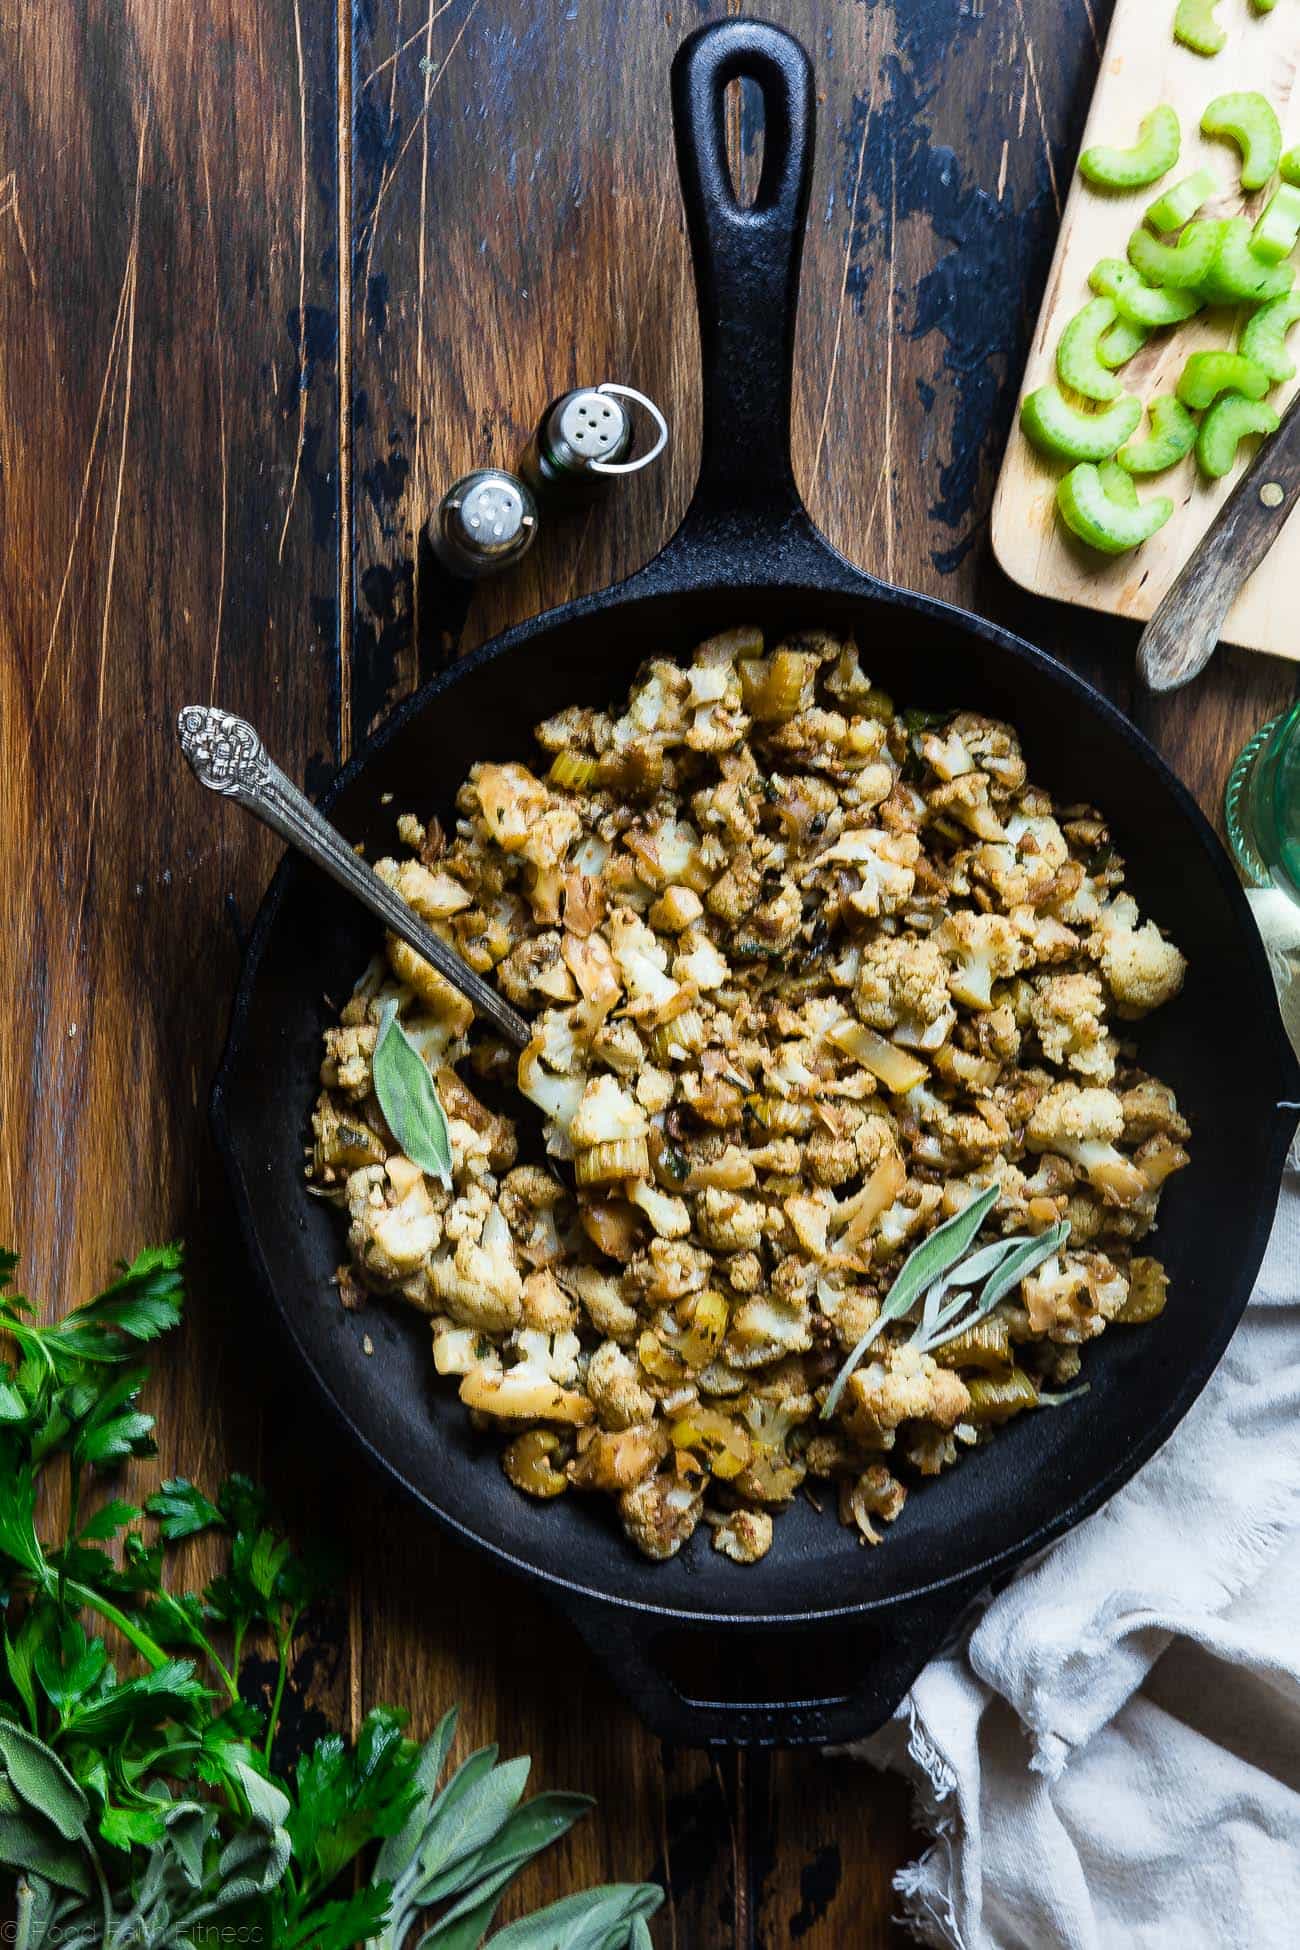 Cauliflower Low Carb Paleo Vegan Stuffing - The BEST vegan stuffing! Made entirely from vegetables but has all the flavor of traditional bread stuffing! It's super easy, whole30 compliant, paleo, vegan, gluten free and SO delicious! Perfect for Thanksgiving or Christmas! | Foodfaithfitness.com | @FoodFaithFit